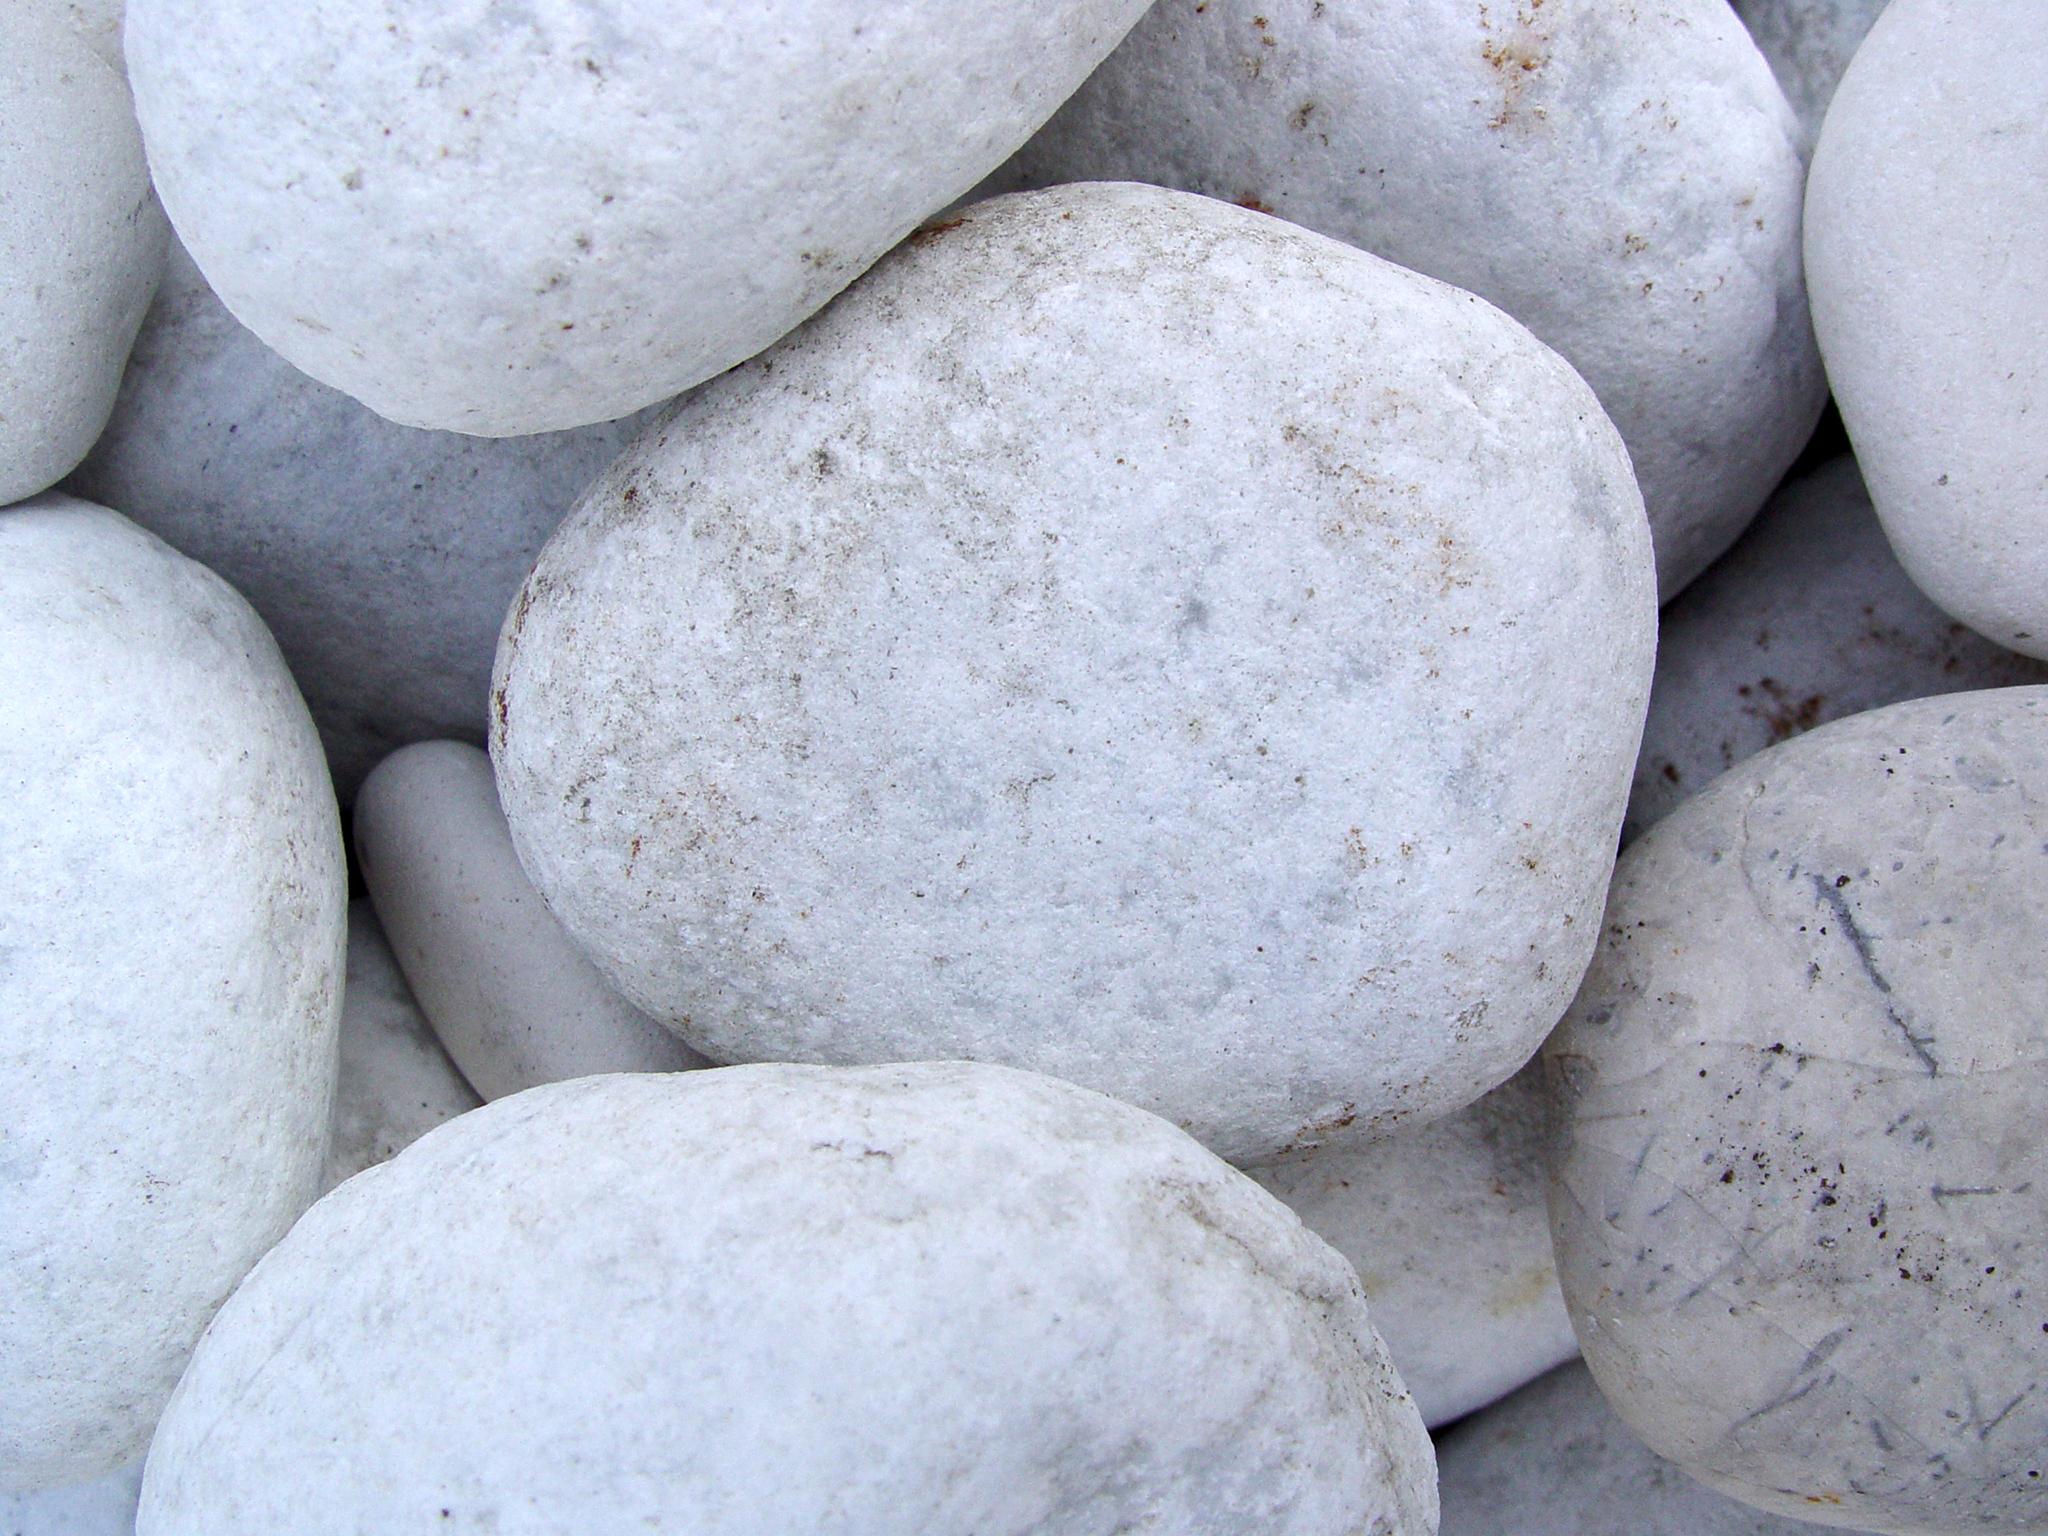 Homeowners and tenants are being warned over suspicious white pebbles